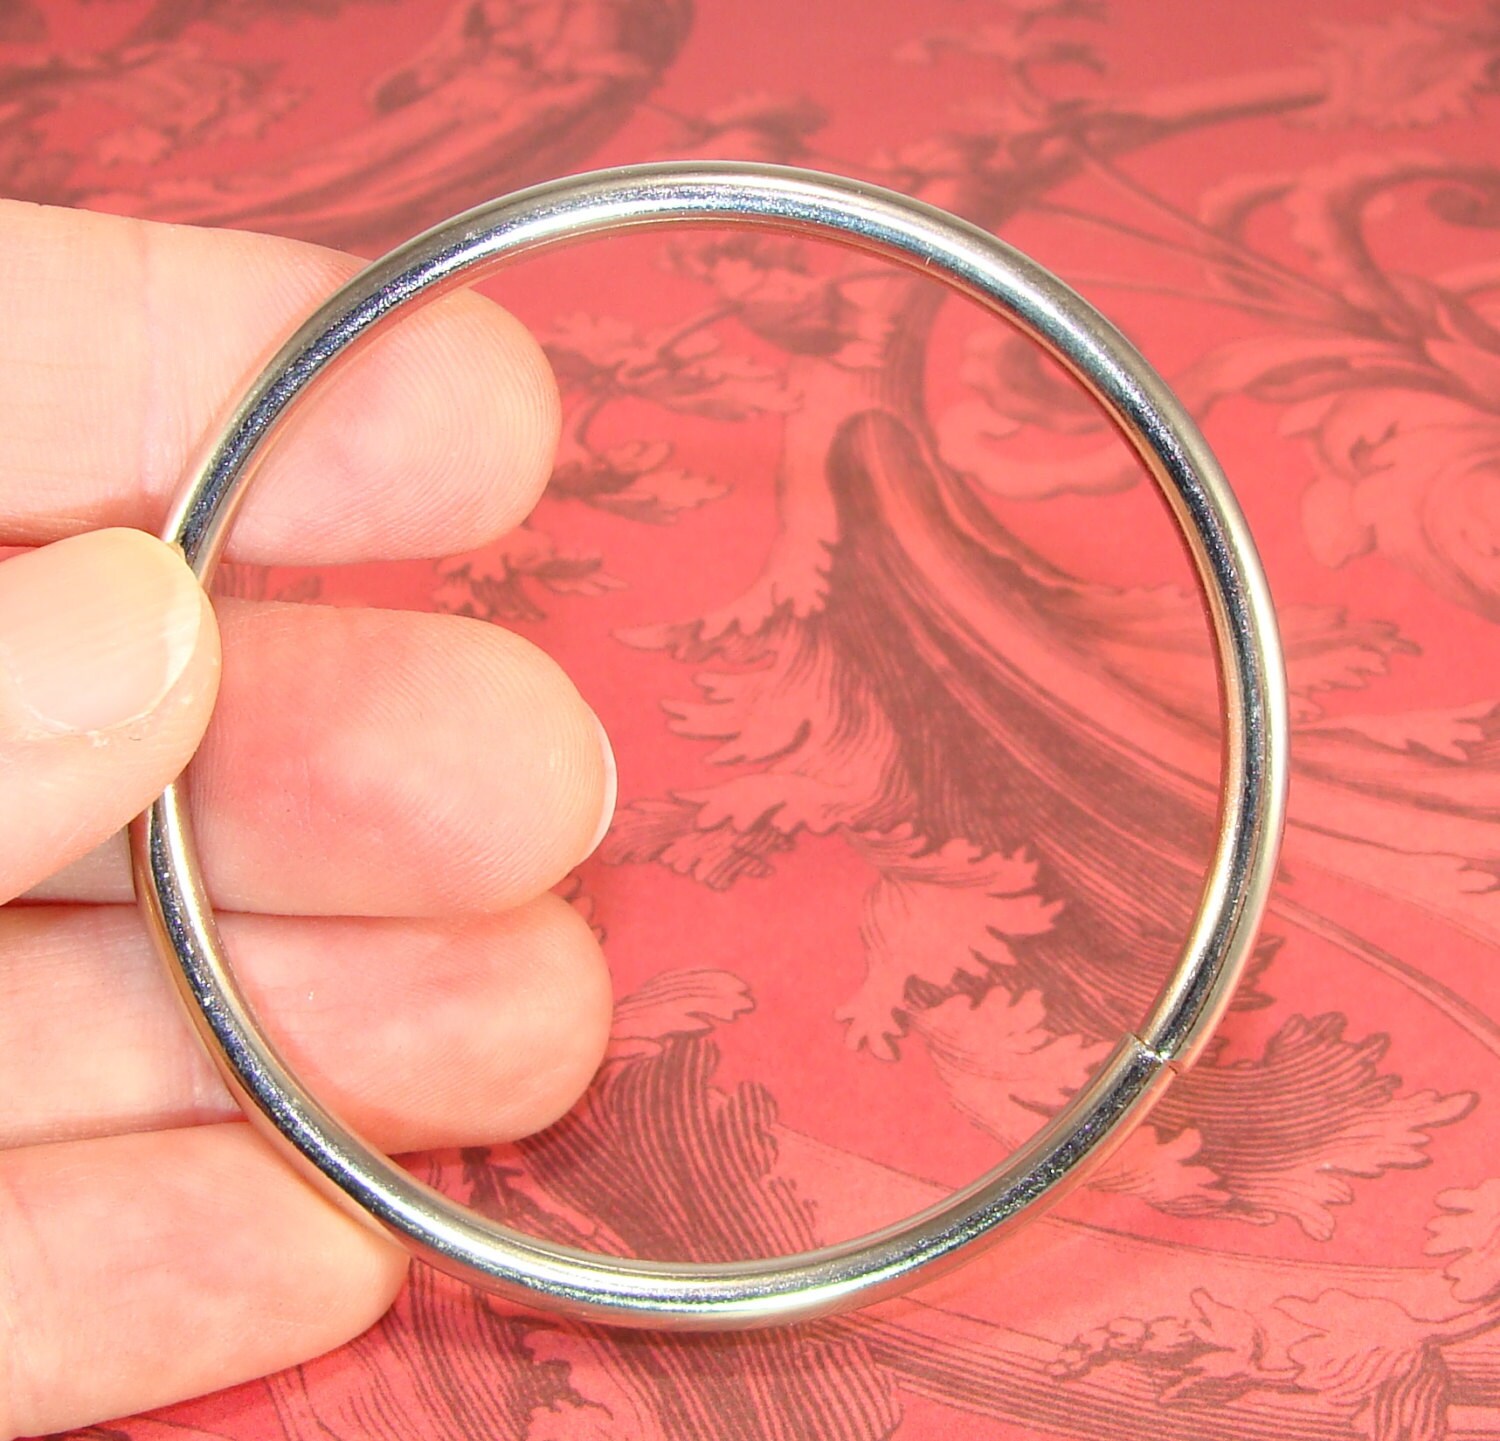 Qty of 4 Metal Rings 4, 4 Inch Size Metal Rings, Dreamcatcher Ring,  Medicine Wheel Supply, Craft Supplies, Metal Hoops 